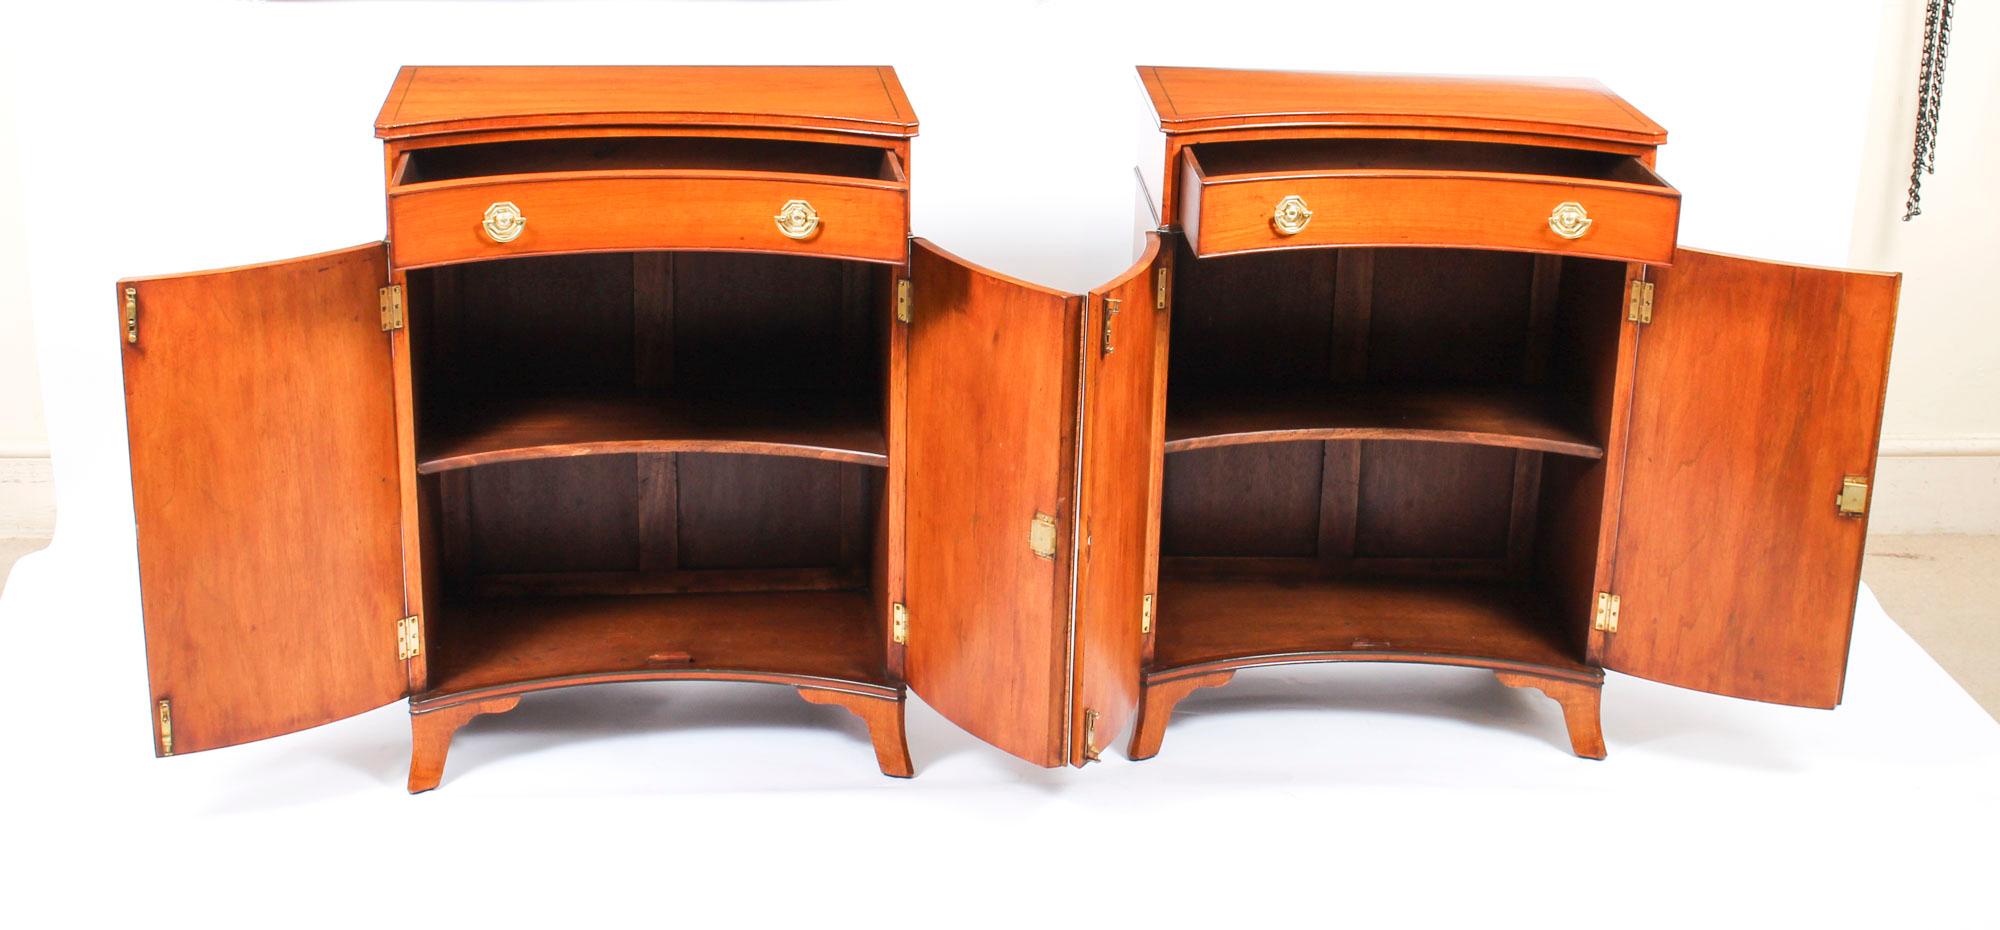 Antique Pair of Adam Revival Satinwood Side Cabinets Commodes, 19th Century 8